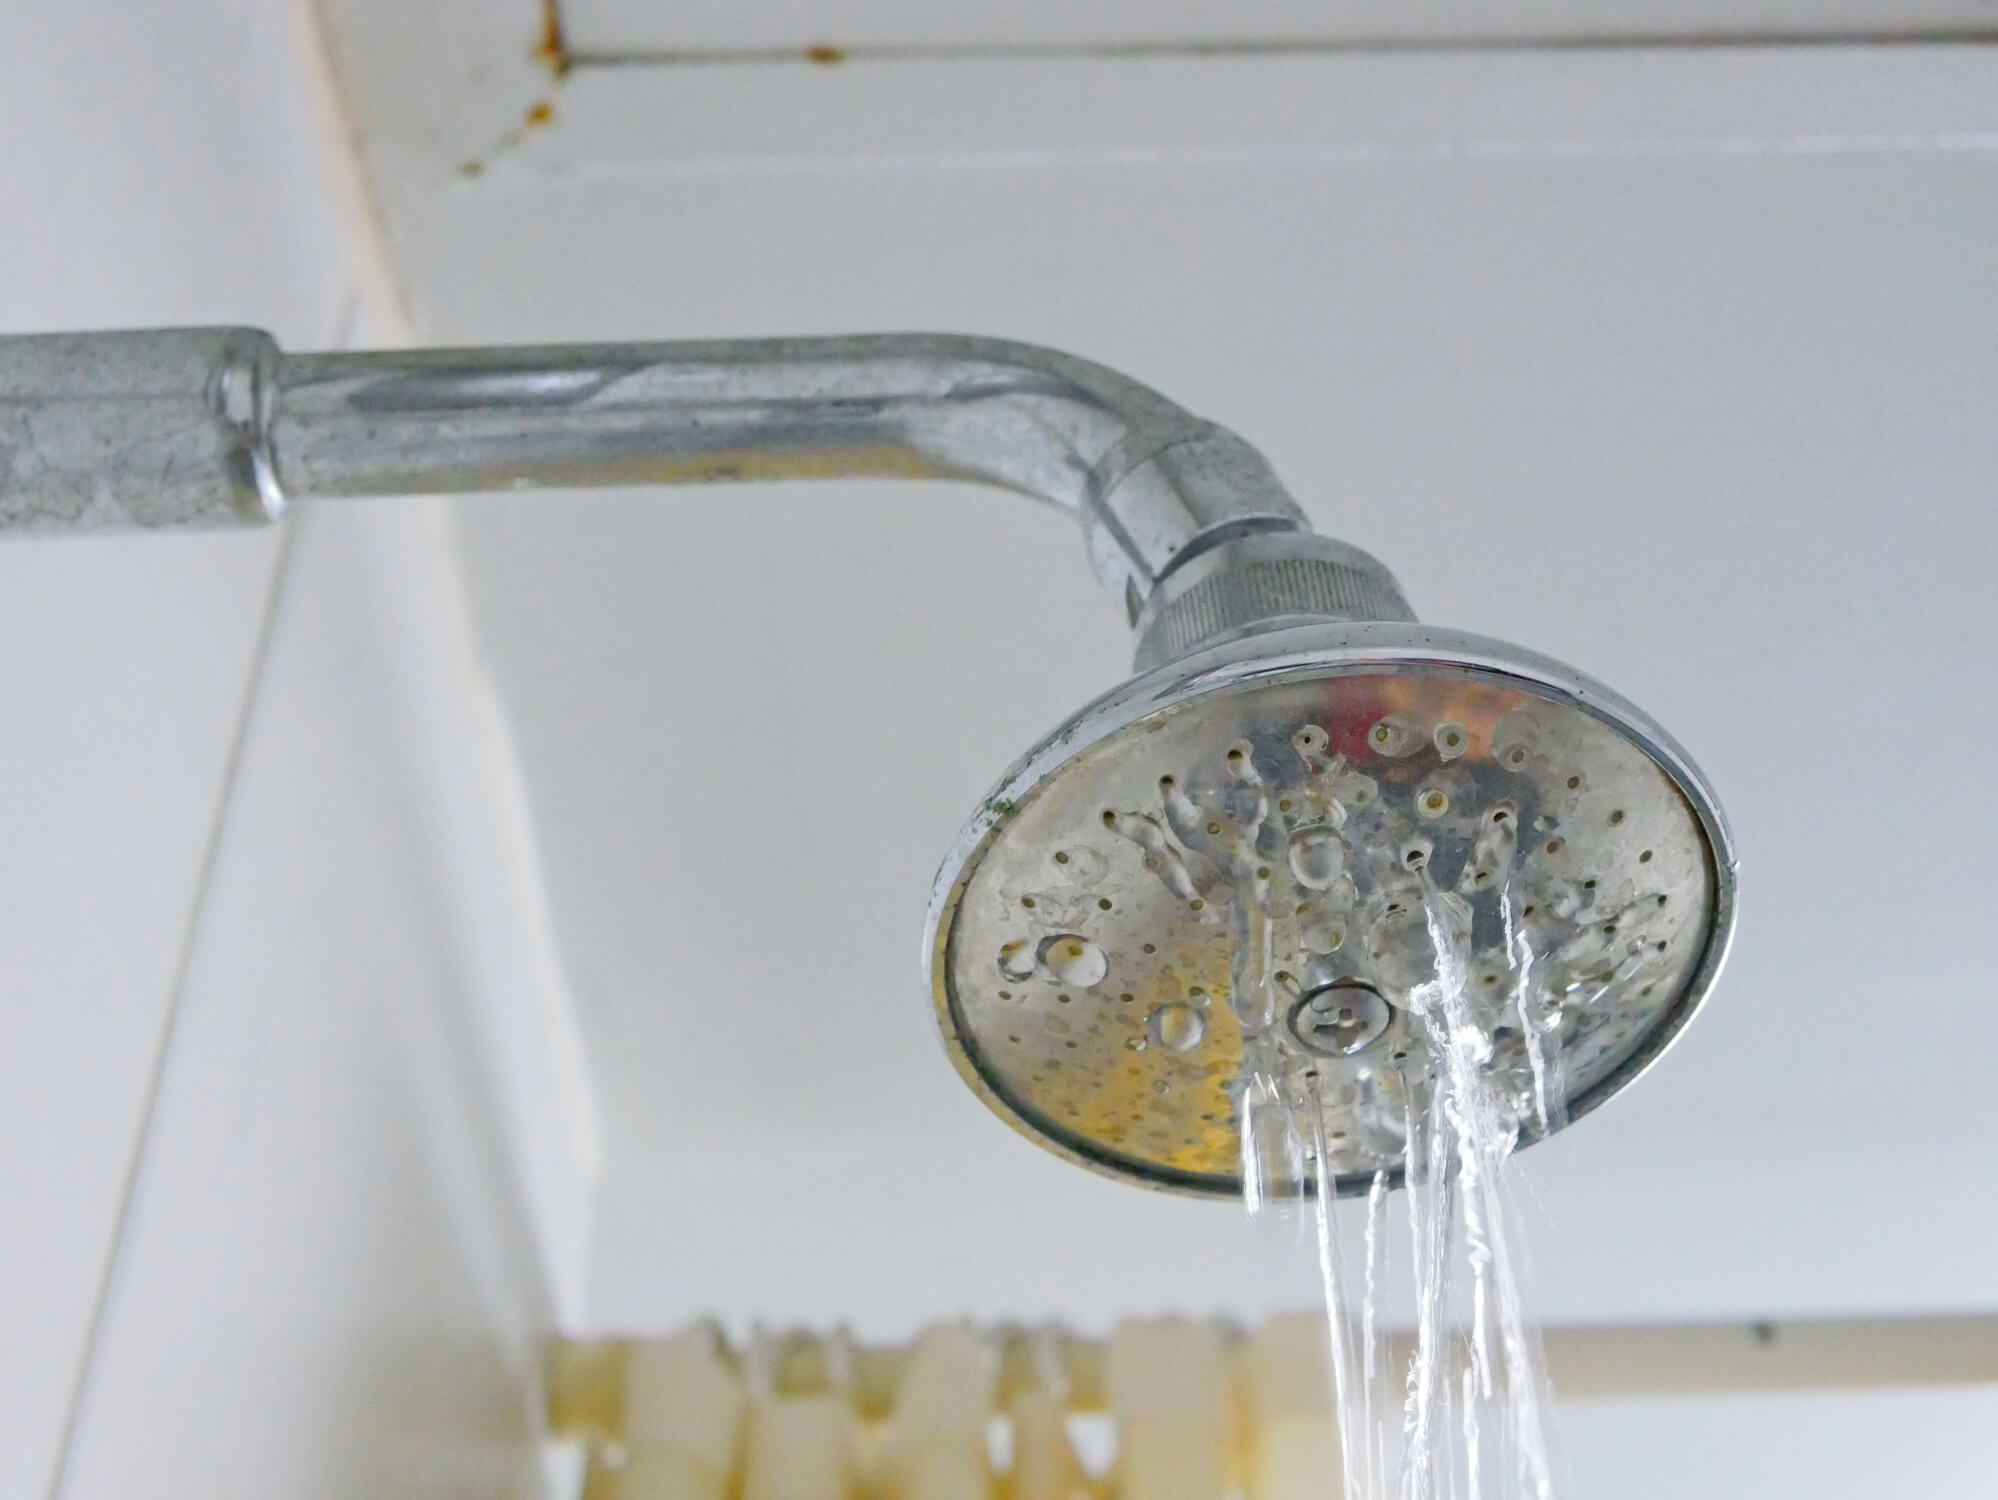 Common Plumbing Problems You Can Fix Yourself